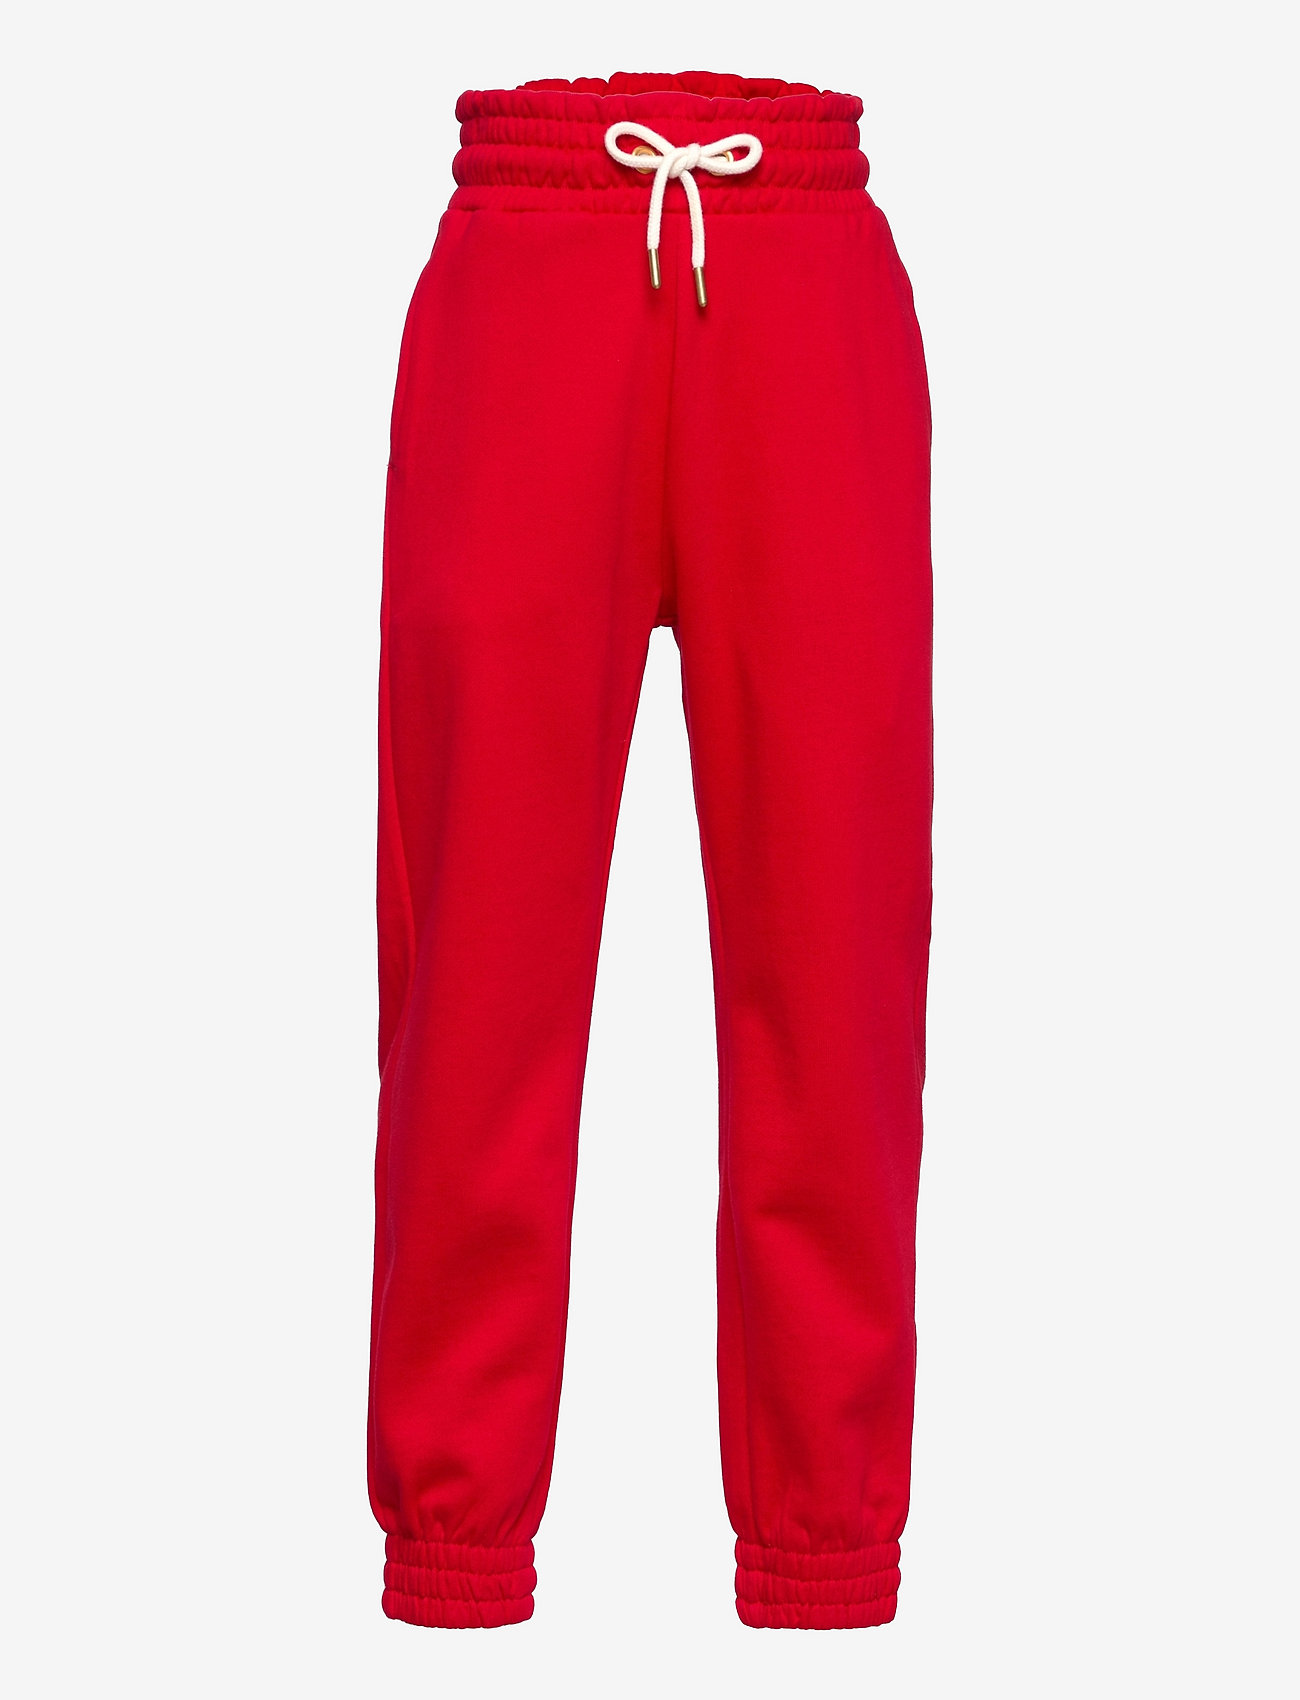 Lindex - Trousers Christmas jogger red - sweatpants - red - 0